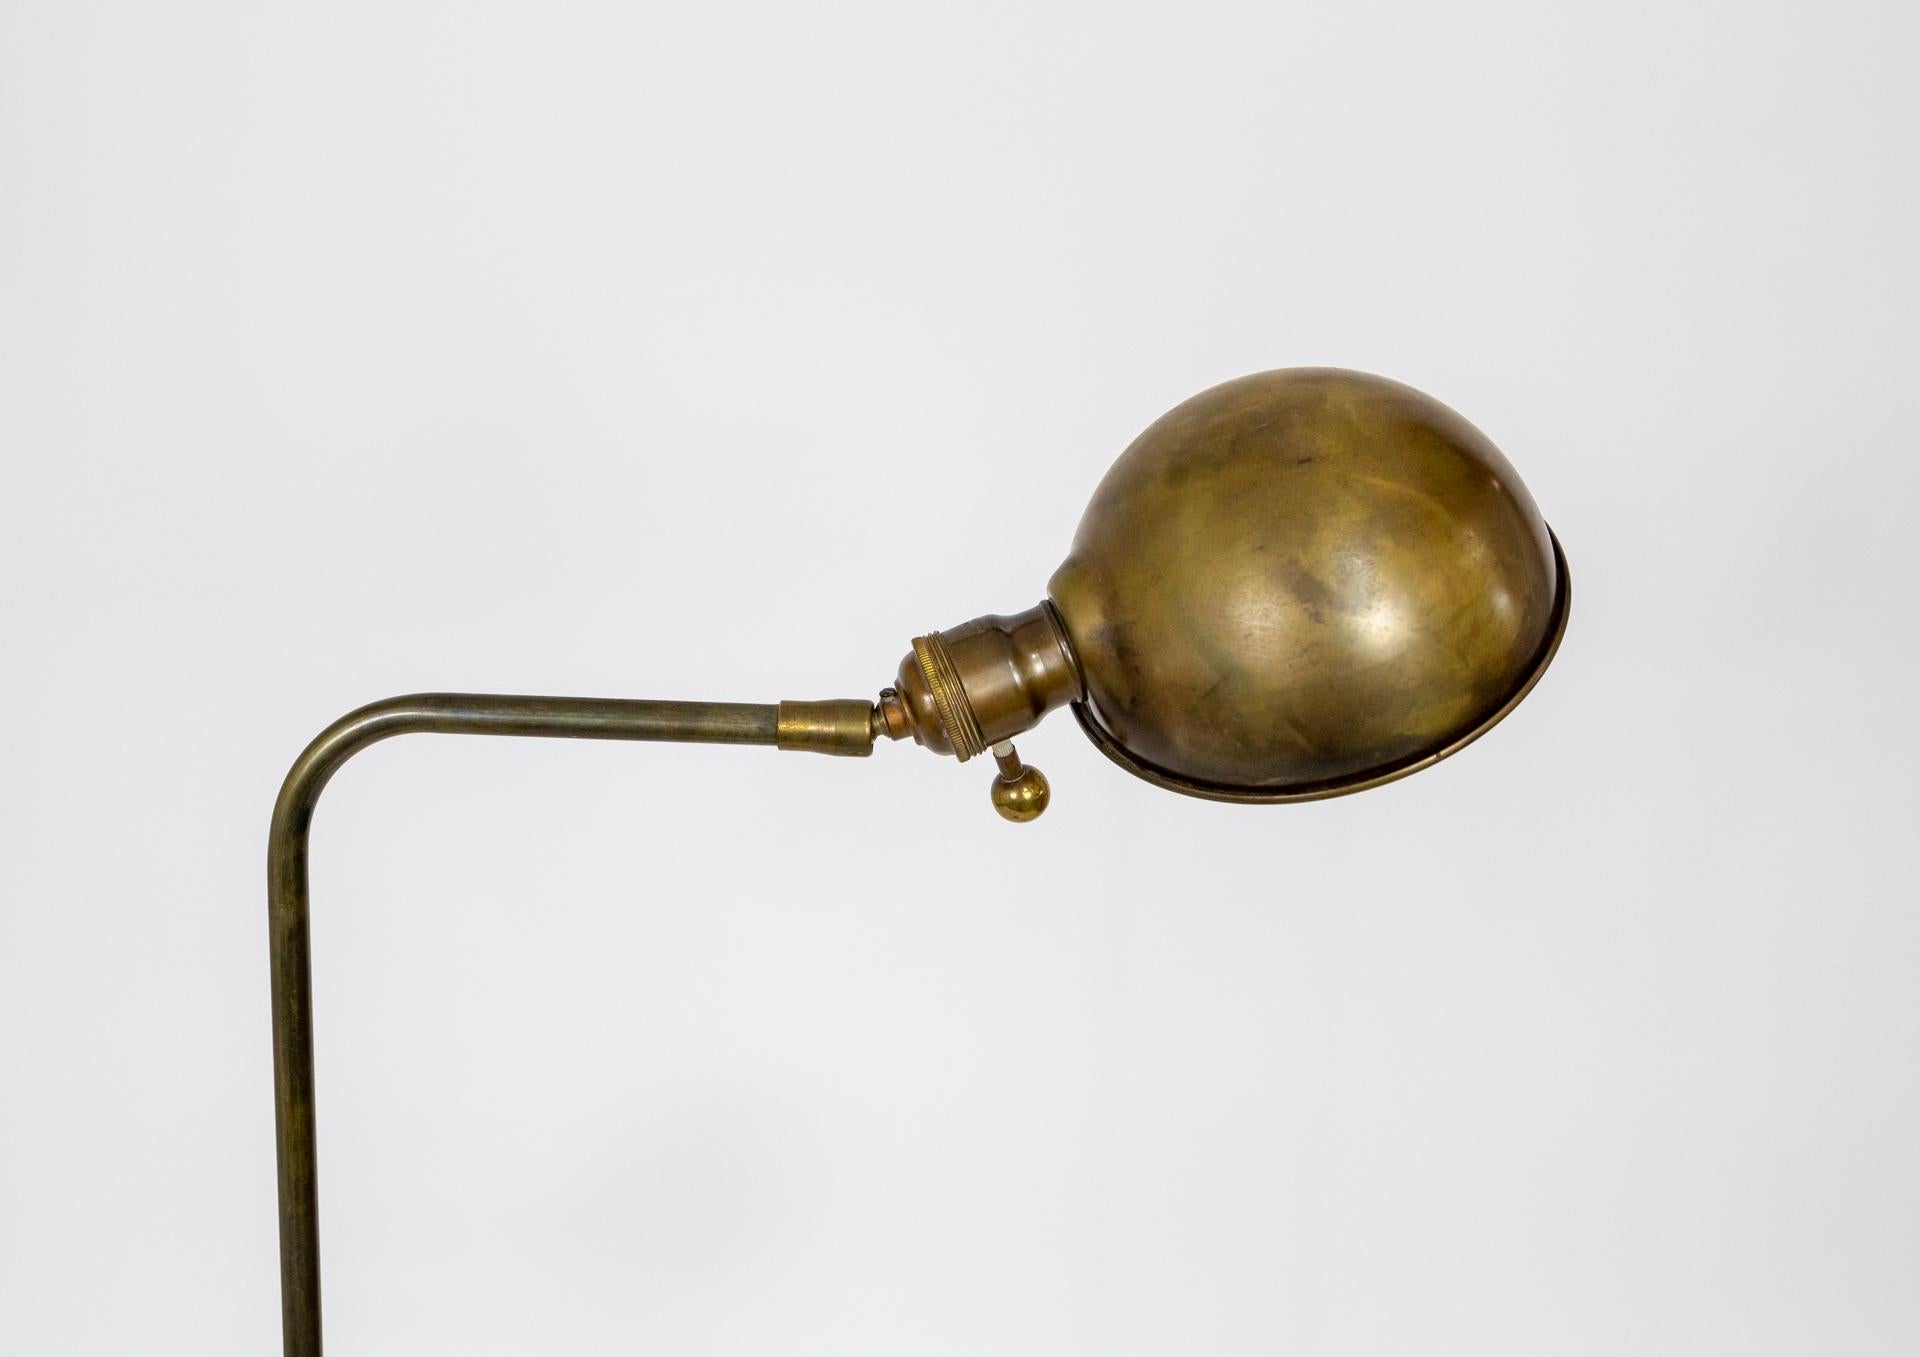 An antique, pharmacy style floor lamp with a dome shaped shade and ball knob on the socket. In richly patinated brass, with the shade interior lacquered white. Adjustable shade angle and height, with weighted base and dimmer (medium base) socket.